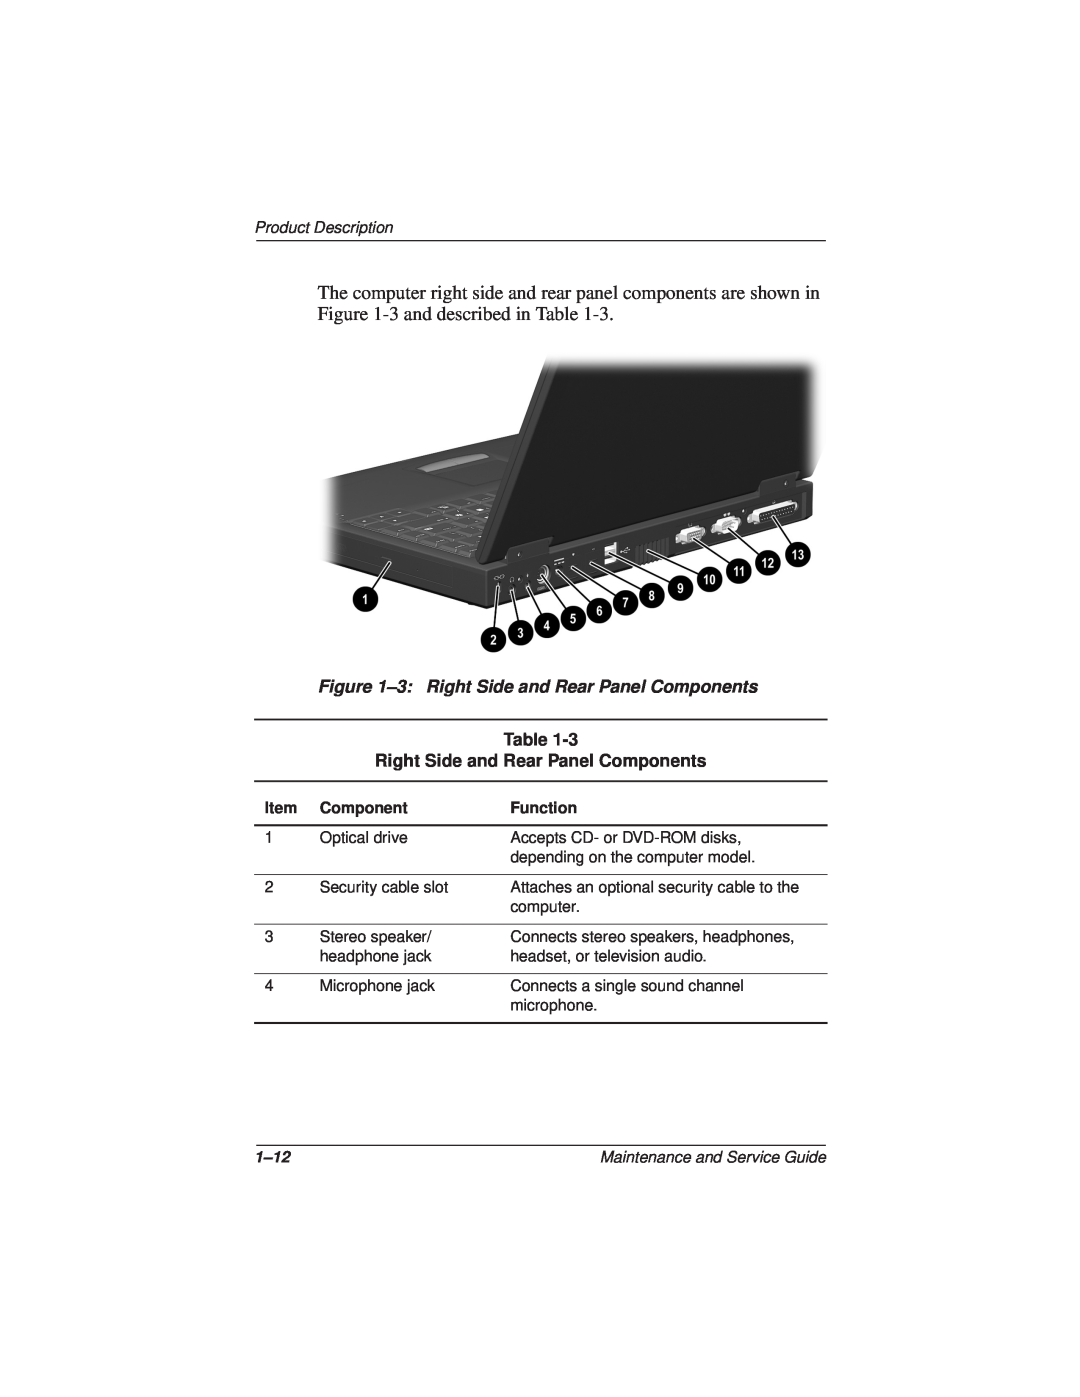 Compaq N110 manual 3 Right Side and Rear Panel Components, Product Description, 1-12 